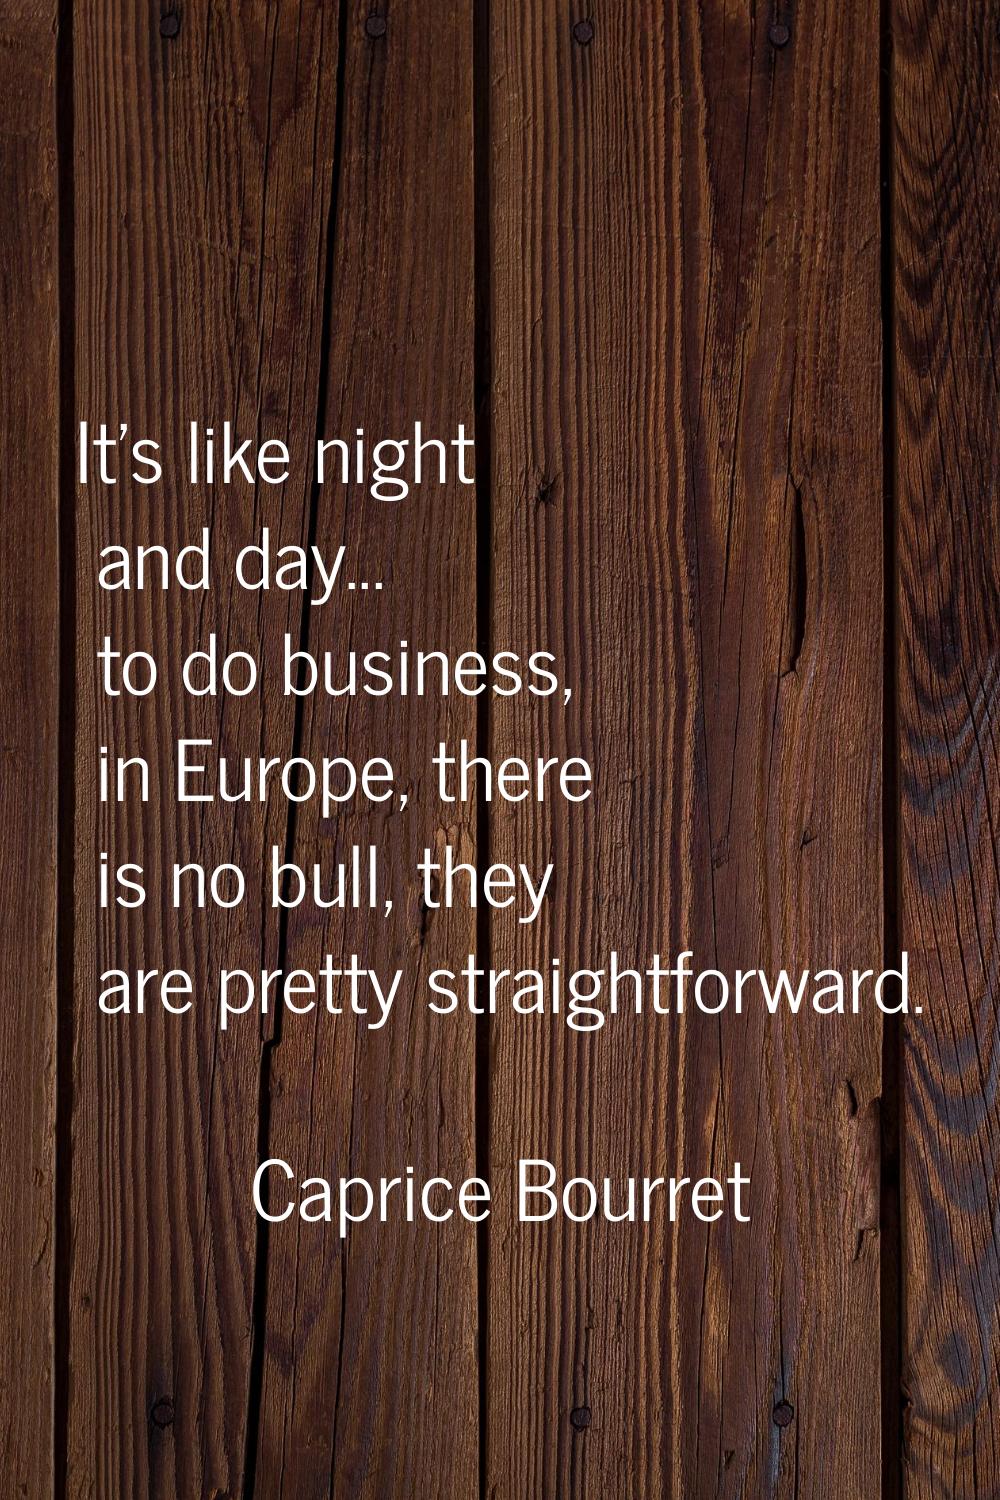 It's like night and day... to do business, in Europe, there is no bull, they are pretty straightfor